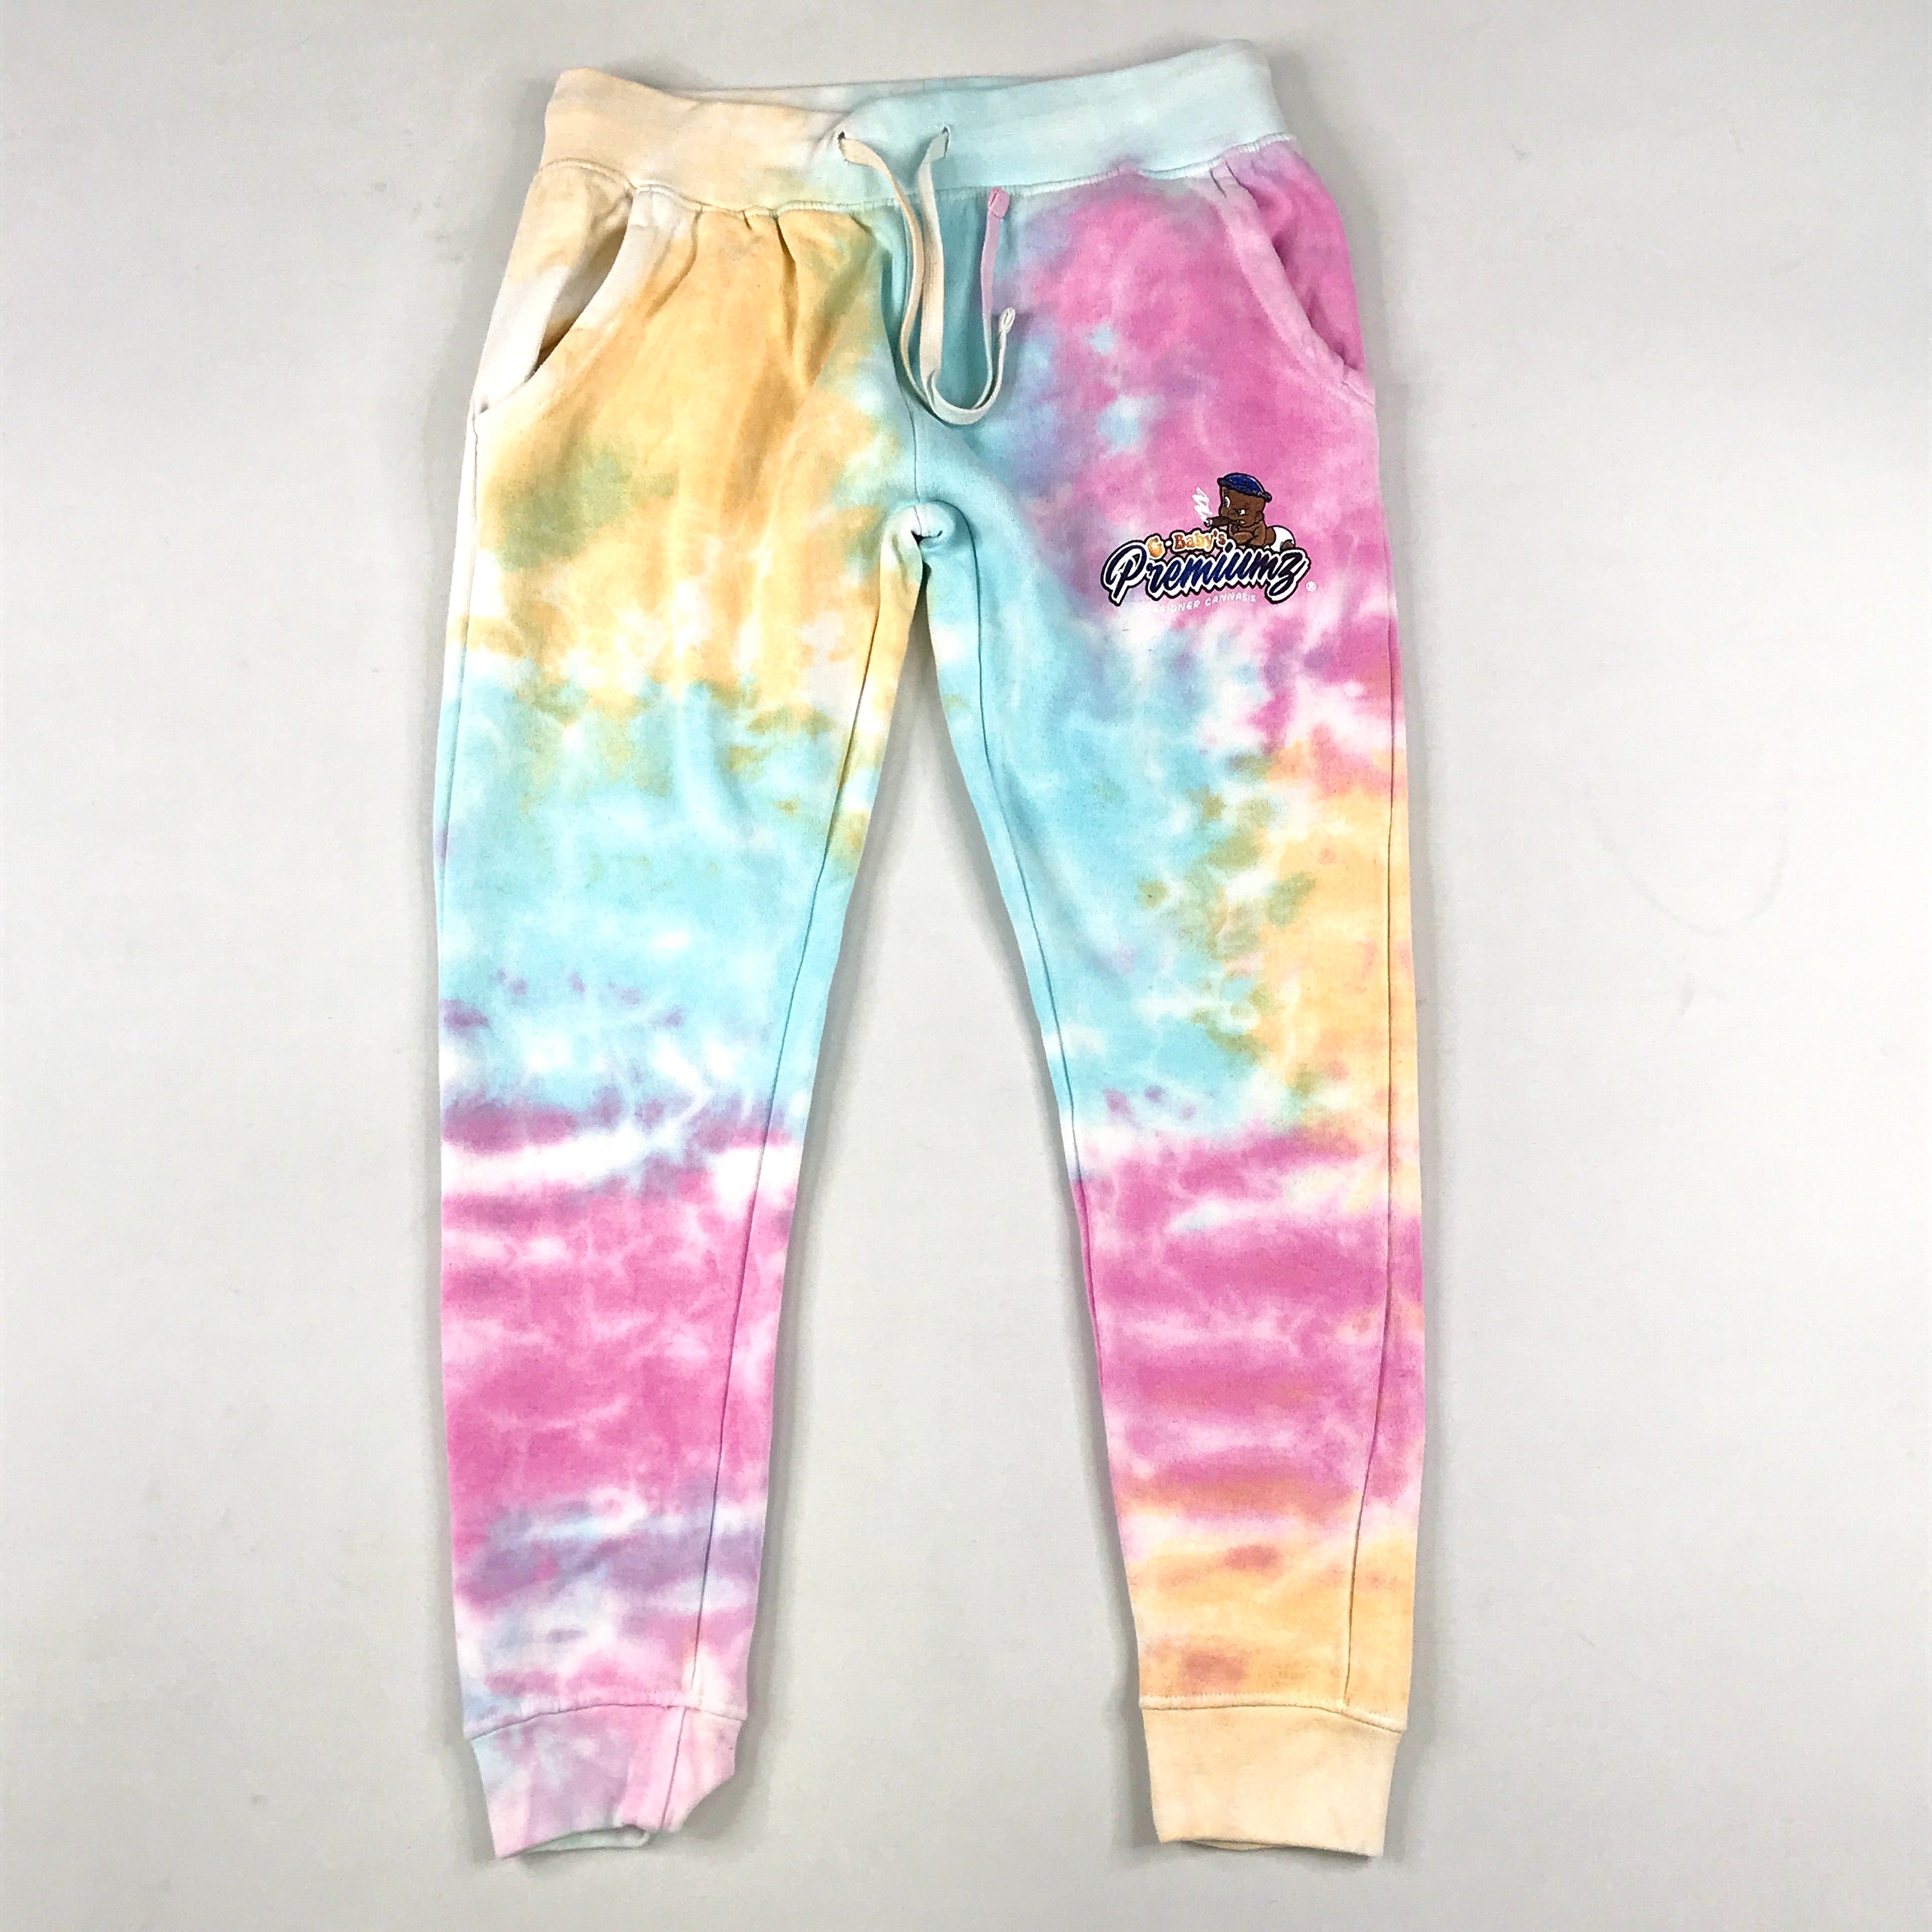 G-Baby’s Premiumz joggers in powder blue-pink